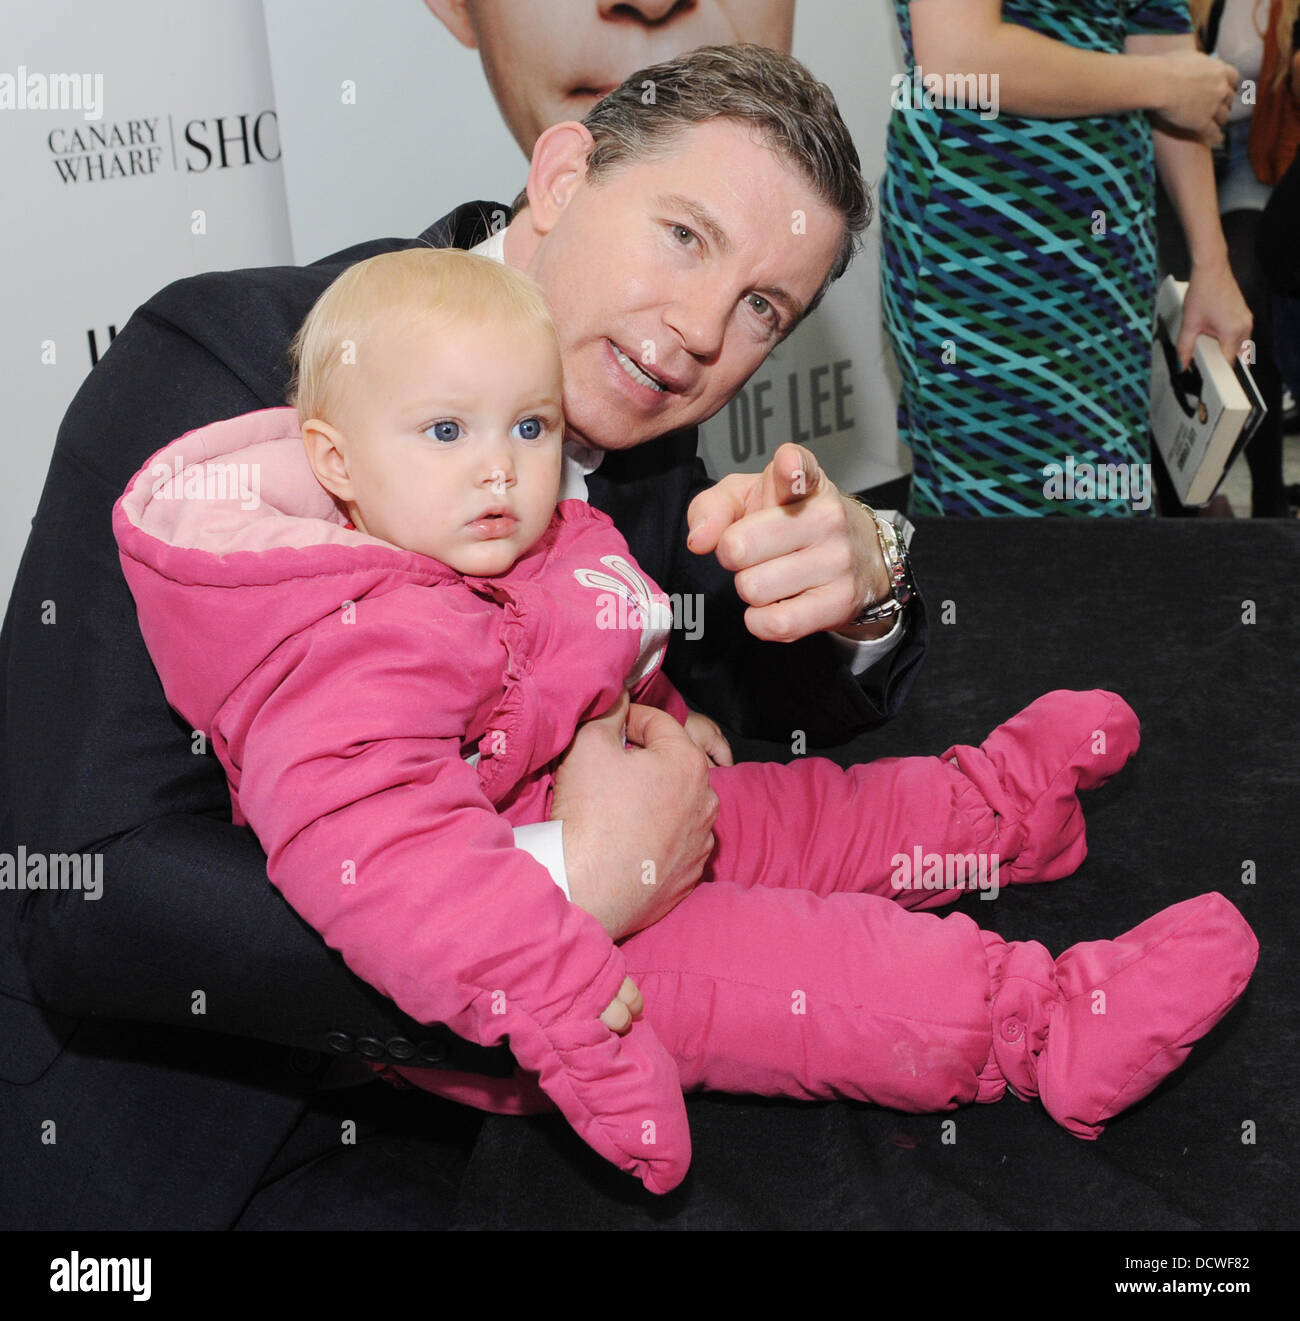 Lee Evans signs copies of his book 'The Life Of Lee' at Waterstone's,  Canary Wharf London, England - 24.11.11 Stock Photo - Alamy